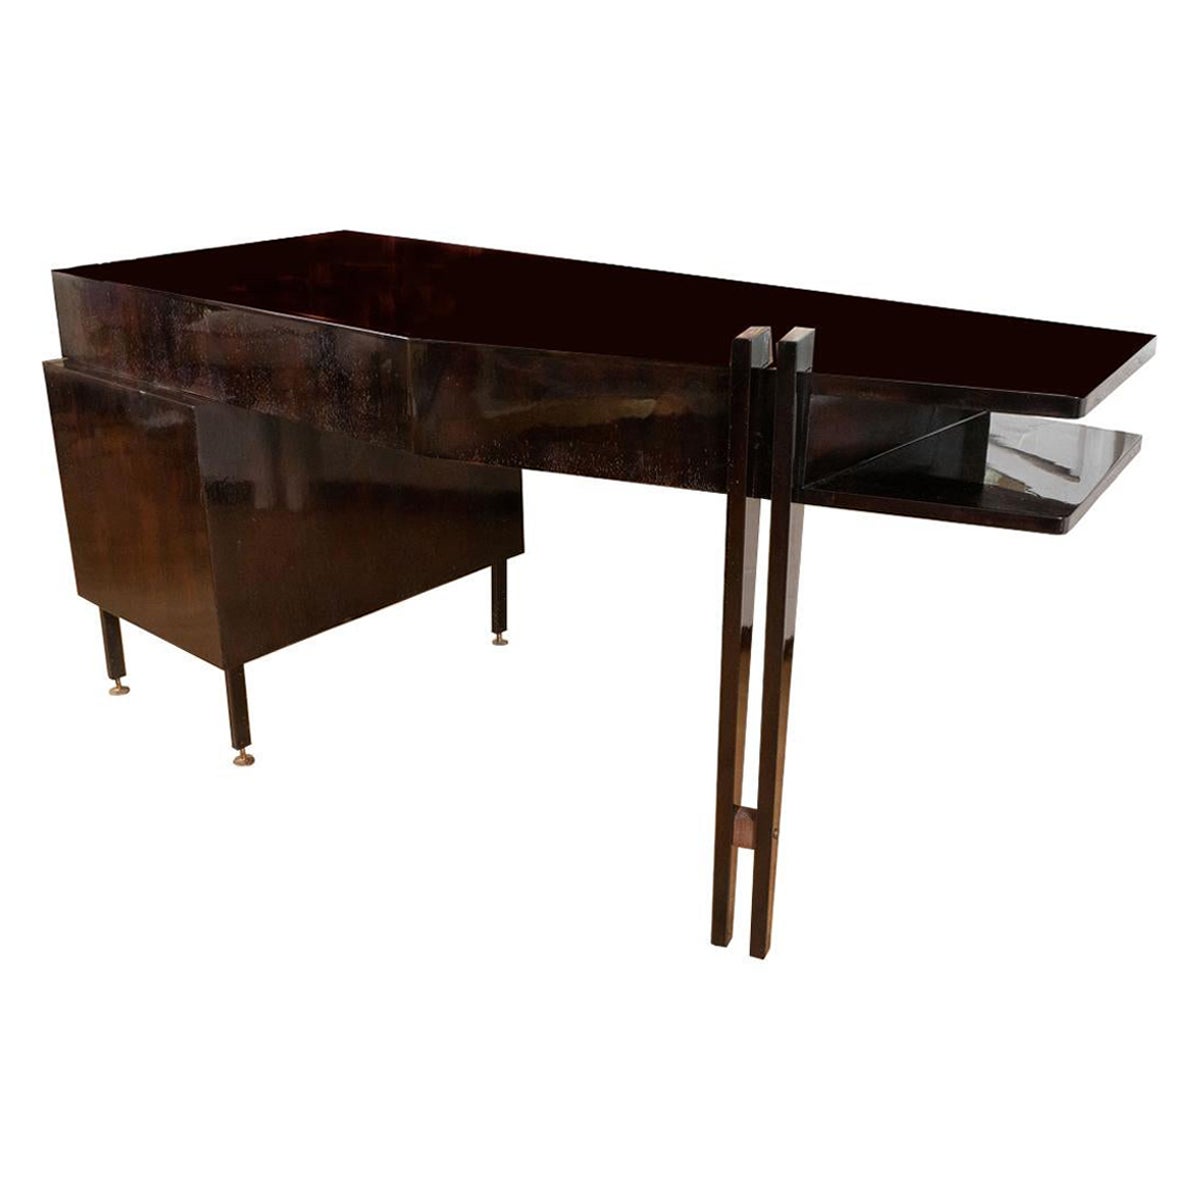 Lacquered wood cantilevered table